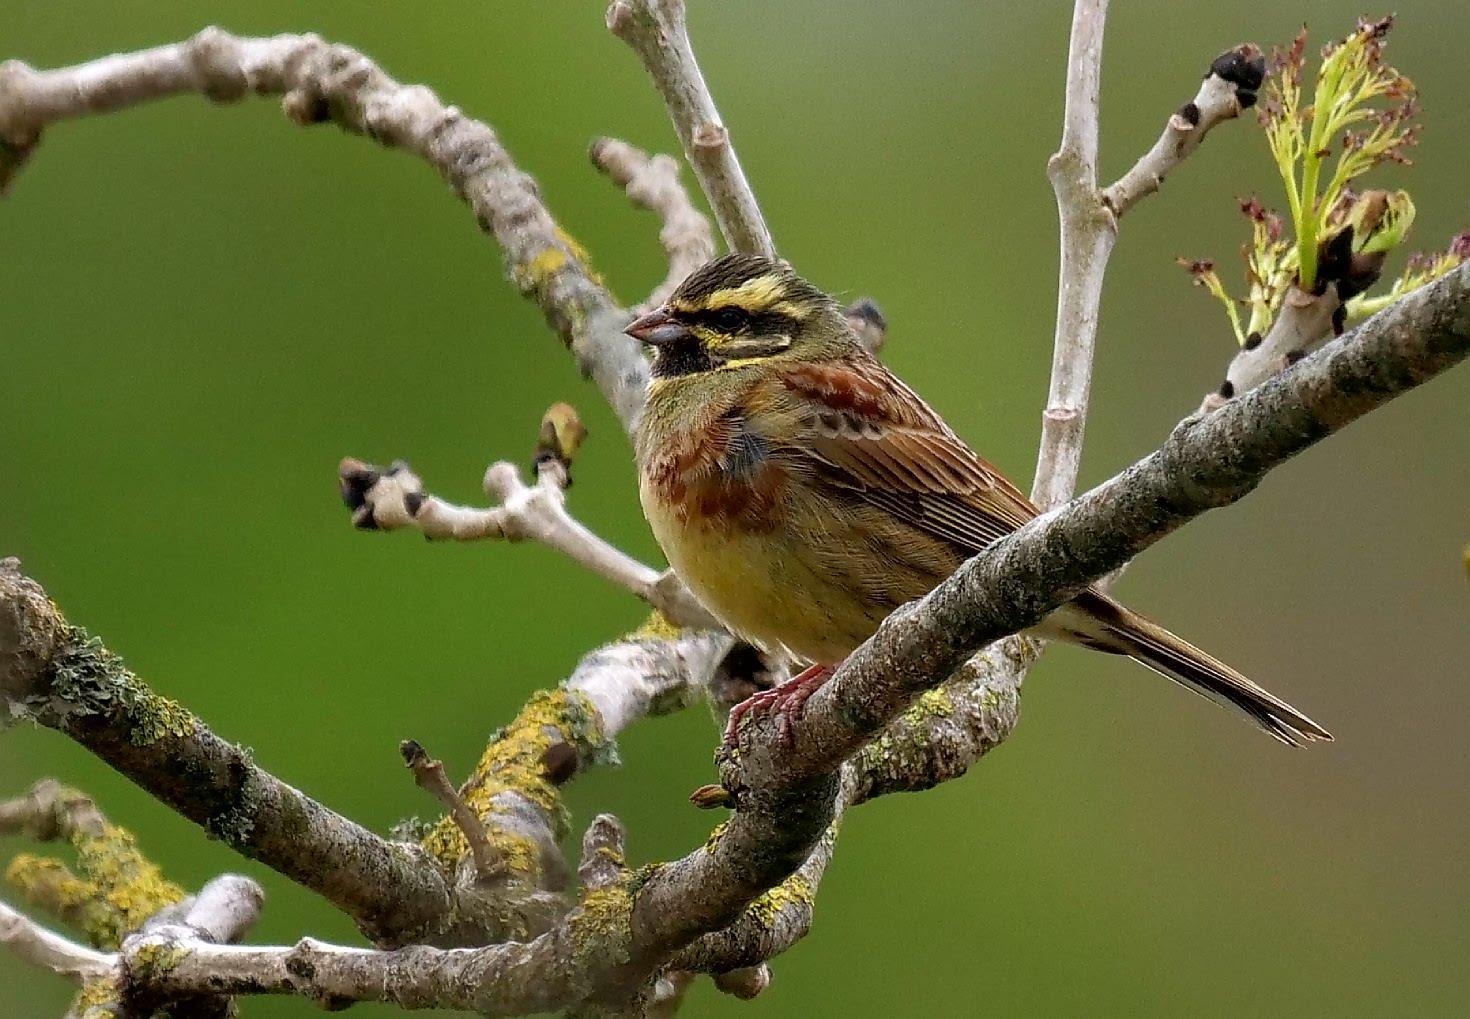 Cirl Bunting Photo by Peter Edmonds